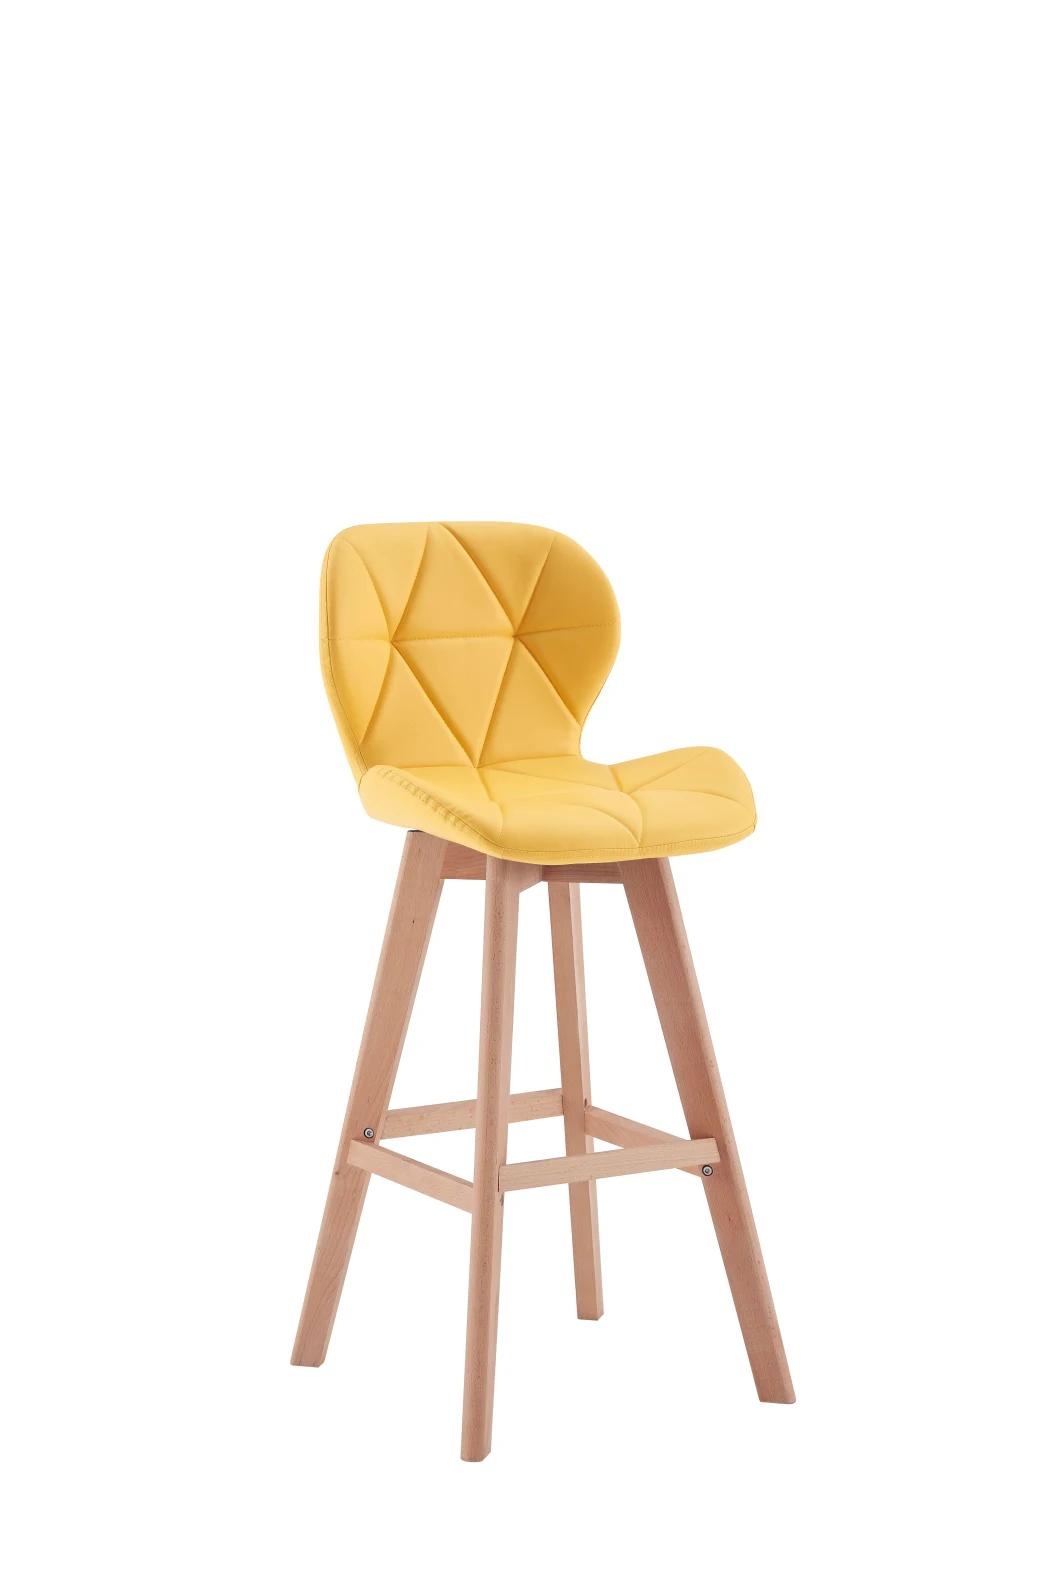 Yellow PU Leather Chair Dining Nordic MID Century Dining Chair Modern Stools